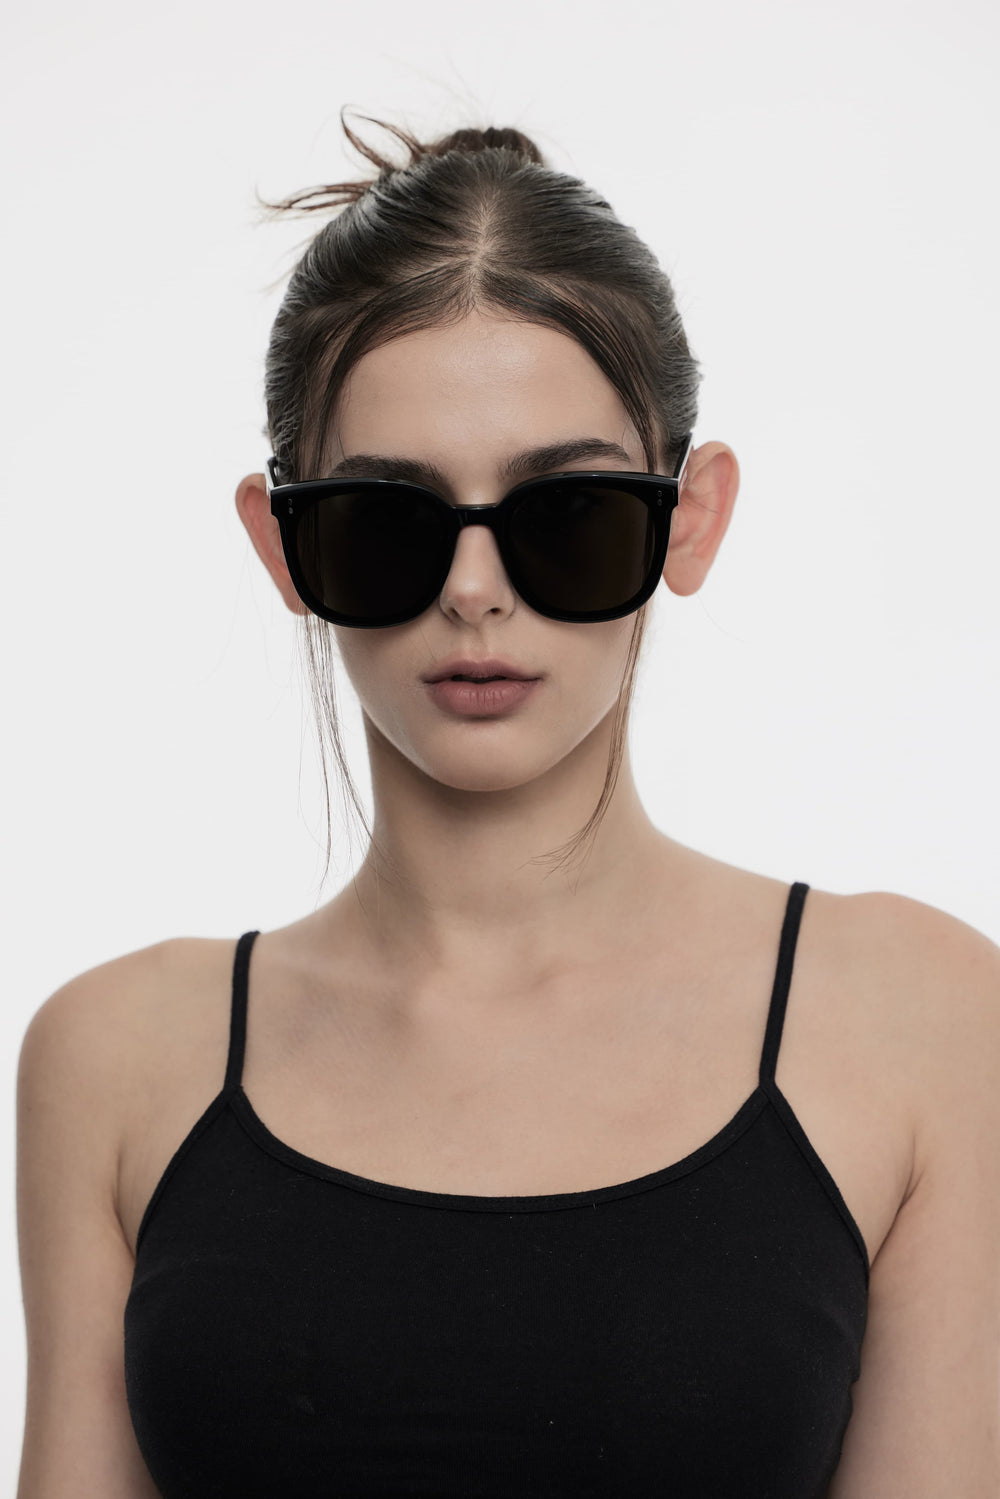 Female Model of her front face wearing Manta in black trendy square sunglasses from Mercury Retrograde Burr Puzzle Collection 